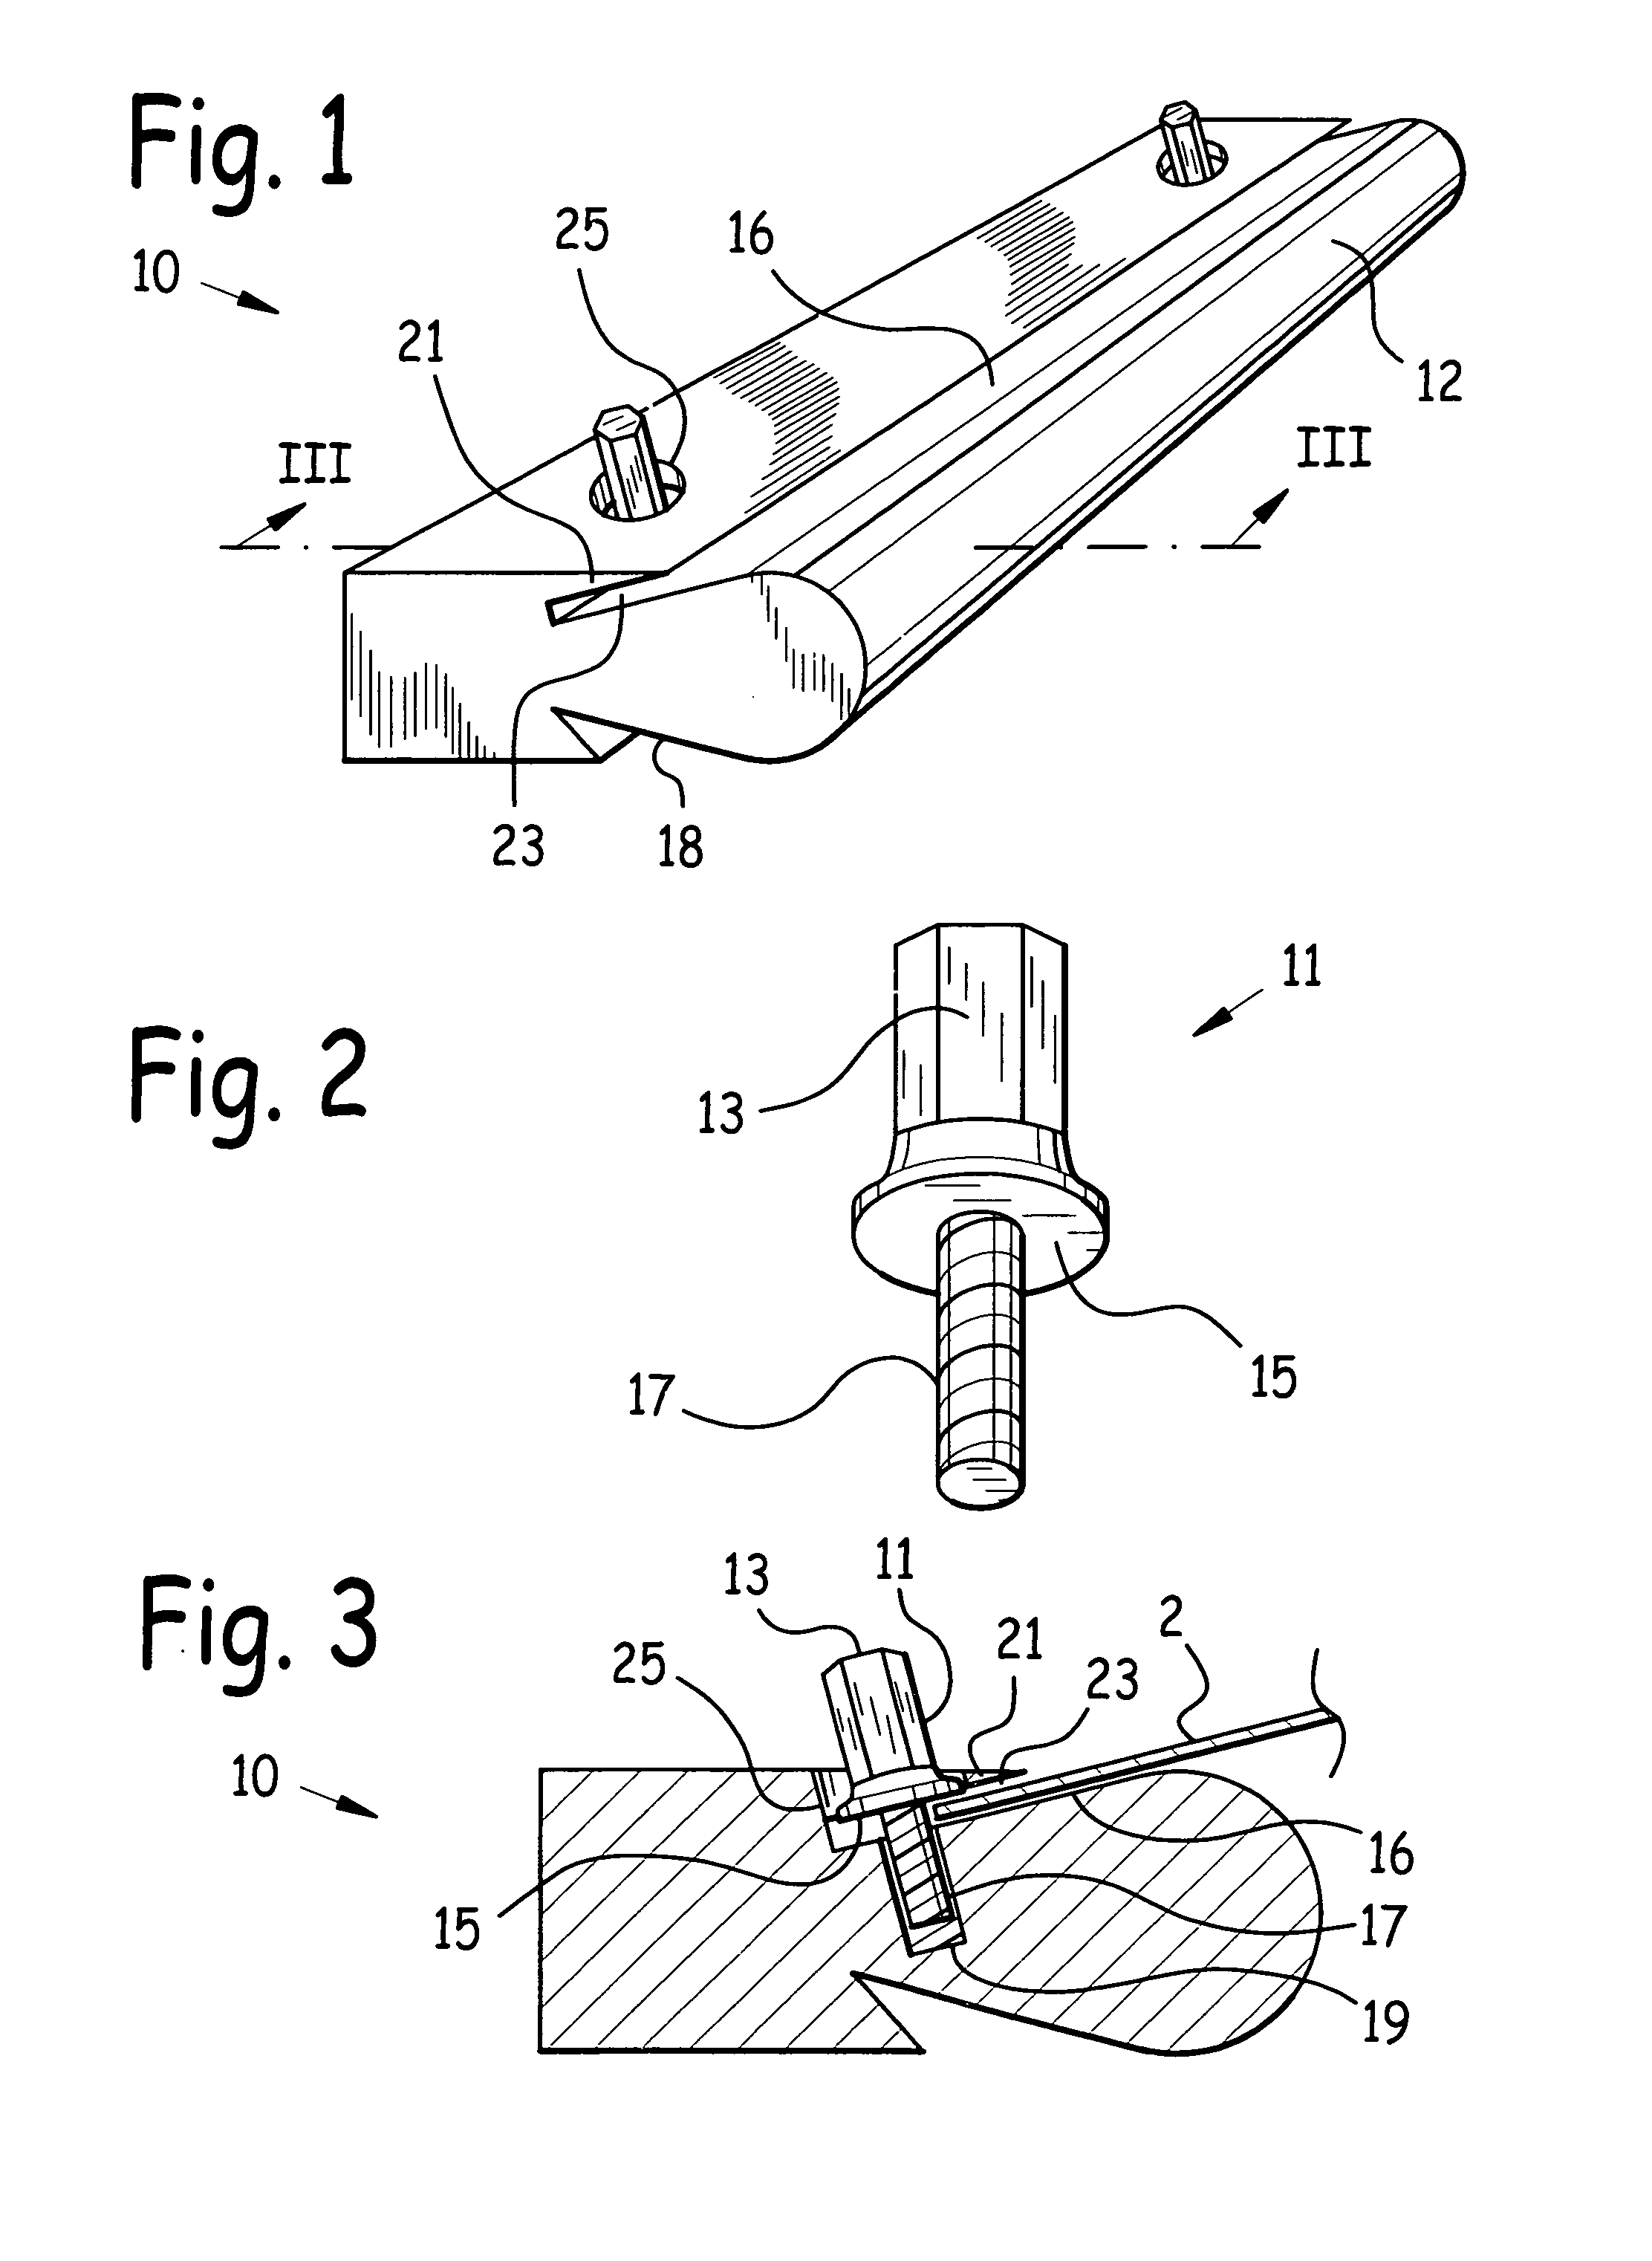 Apparatus and method to manufacture shaped counter top edges for custom counter tops